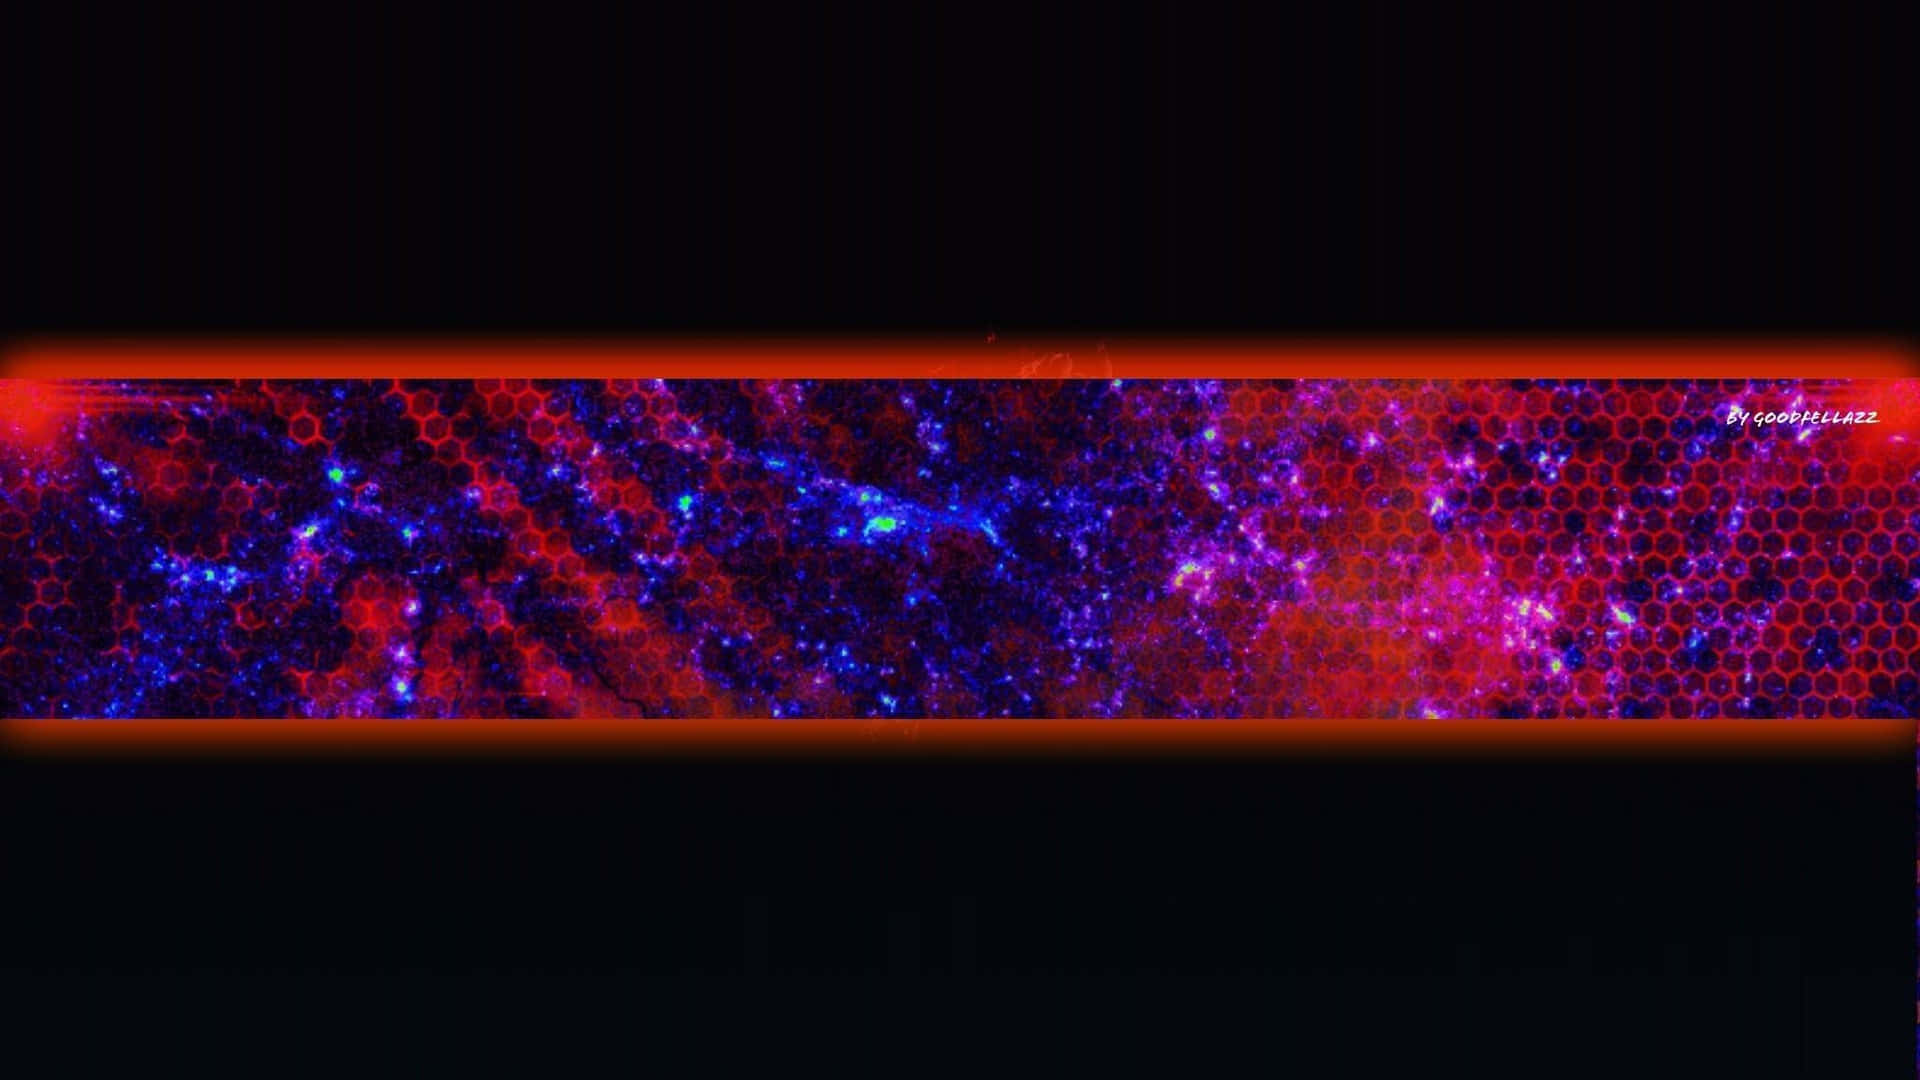 A Red And Blue Galaxy With A Black Background